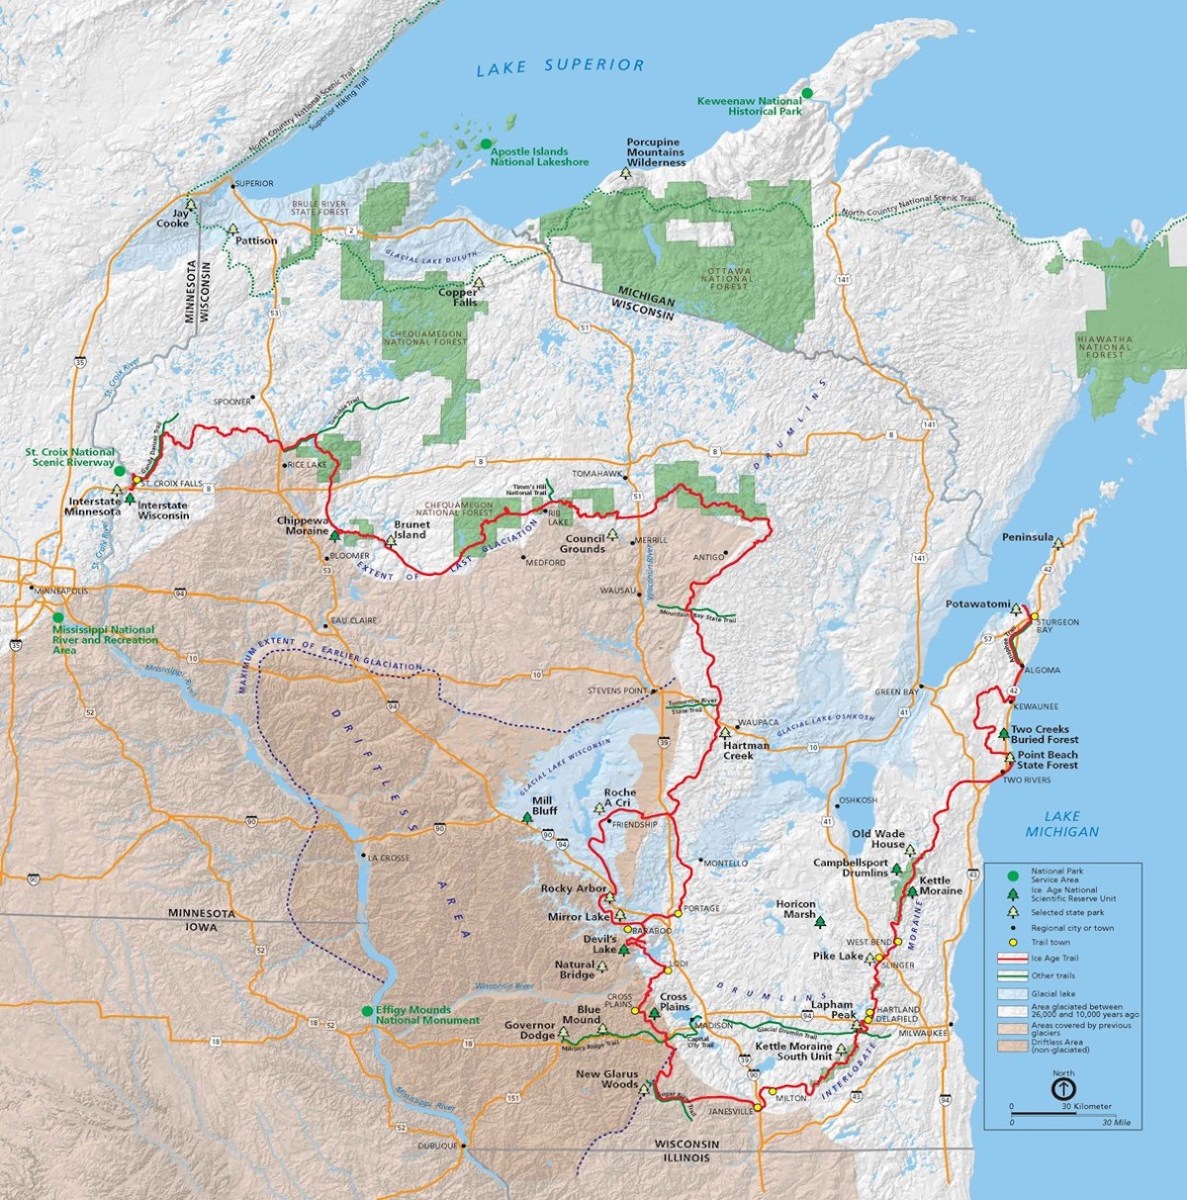 The Ice Age Trail, marked in red, stretches more than 1,000 miles across the state of Wisconsin.